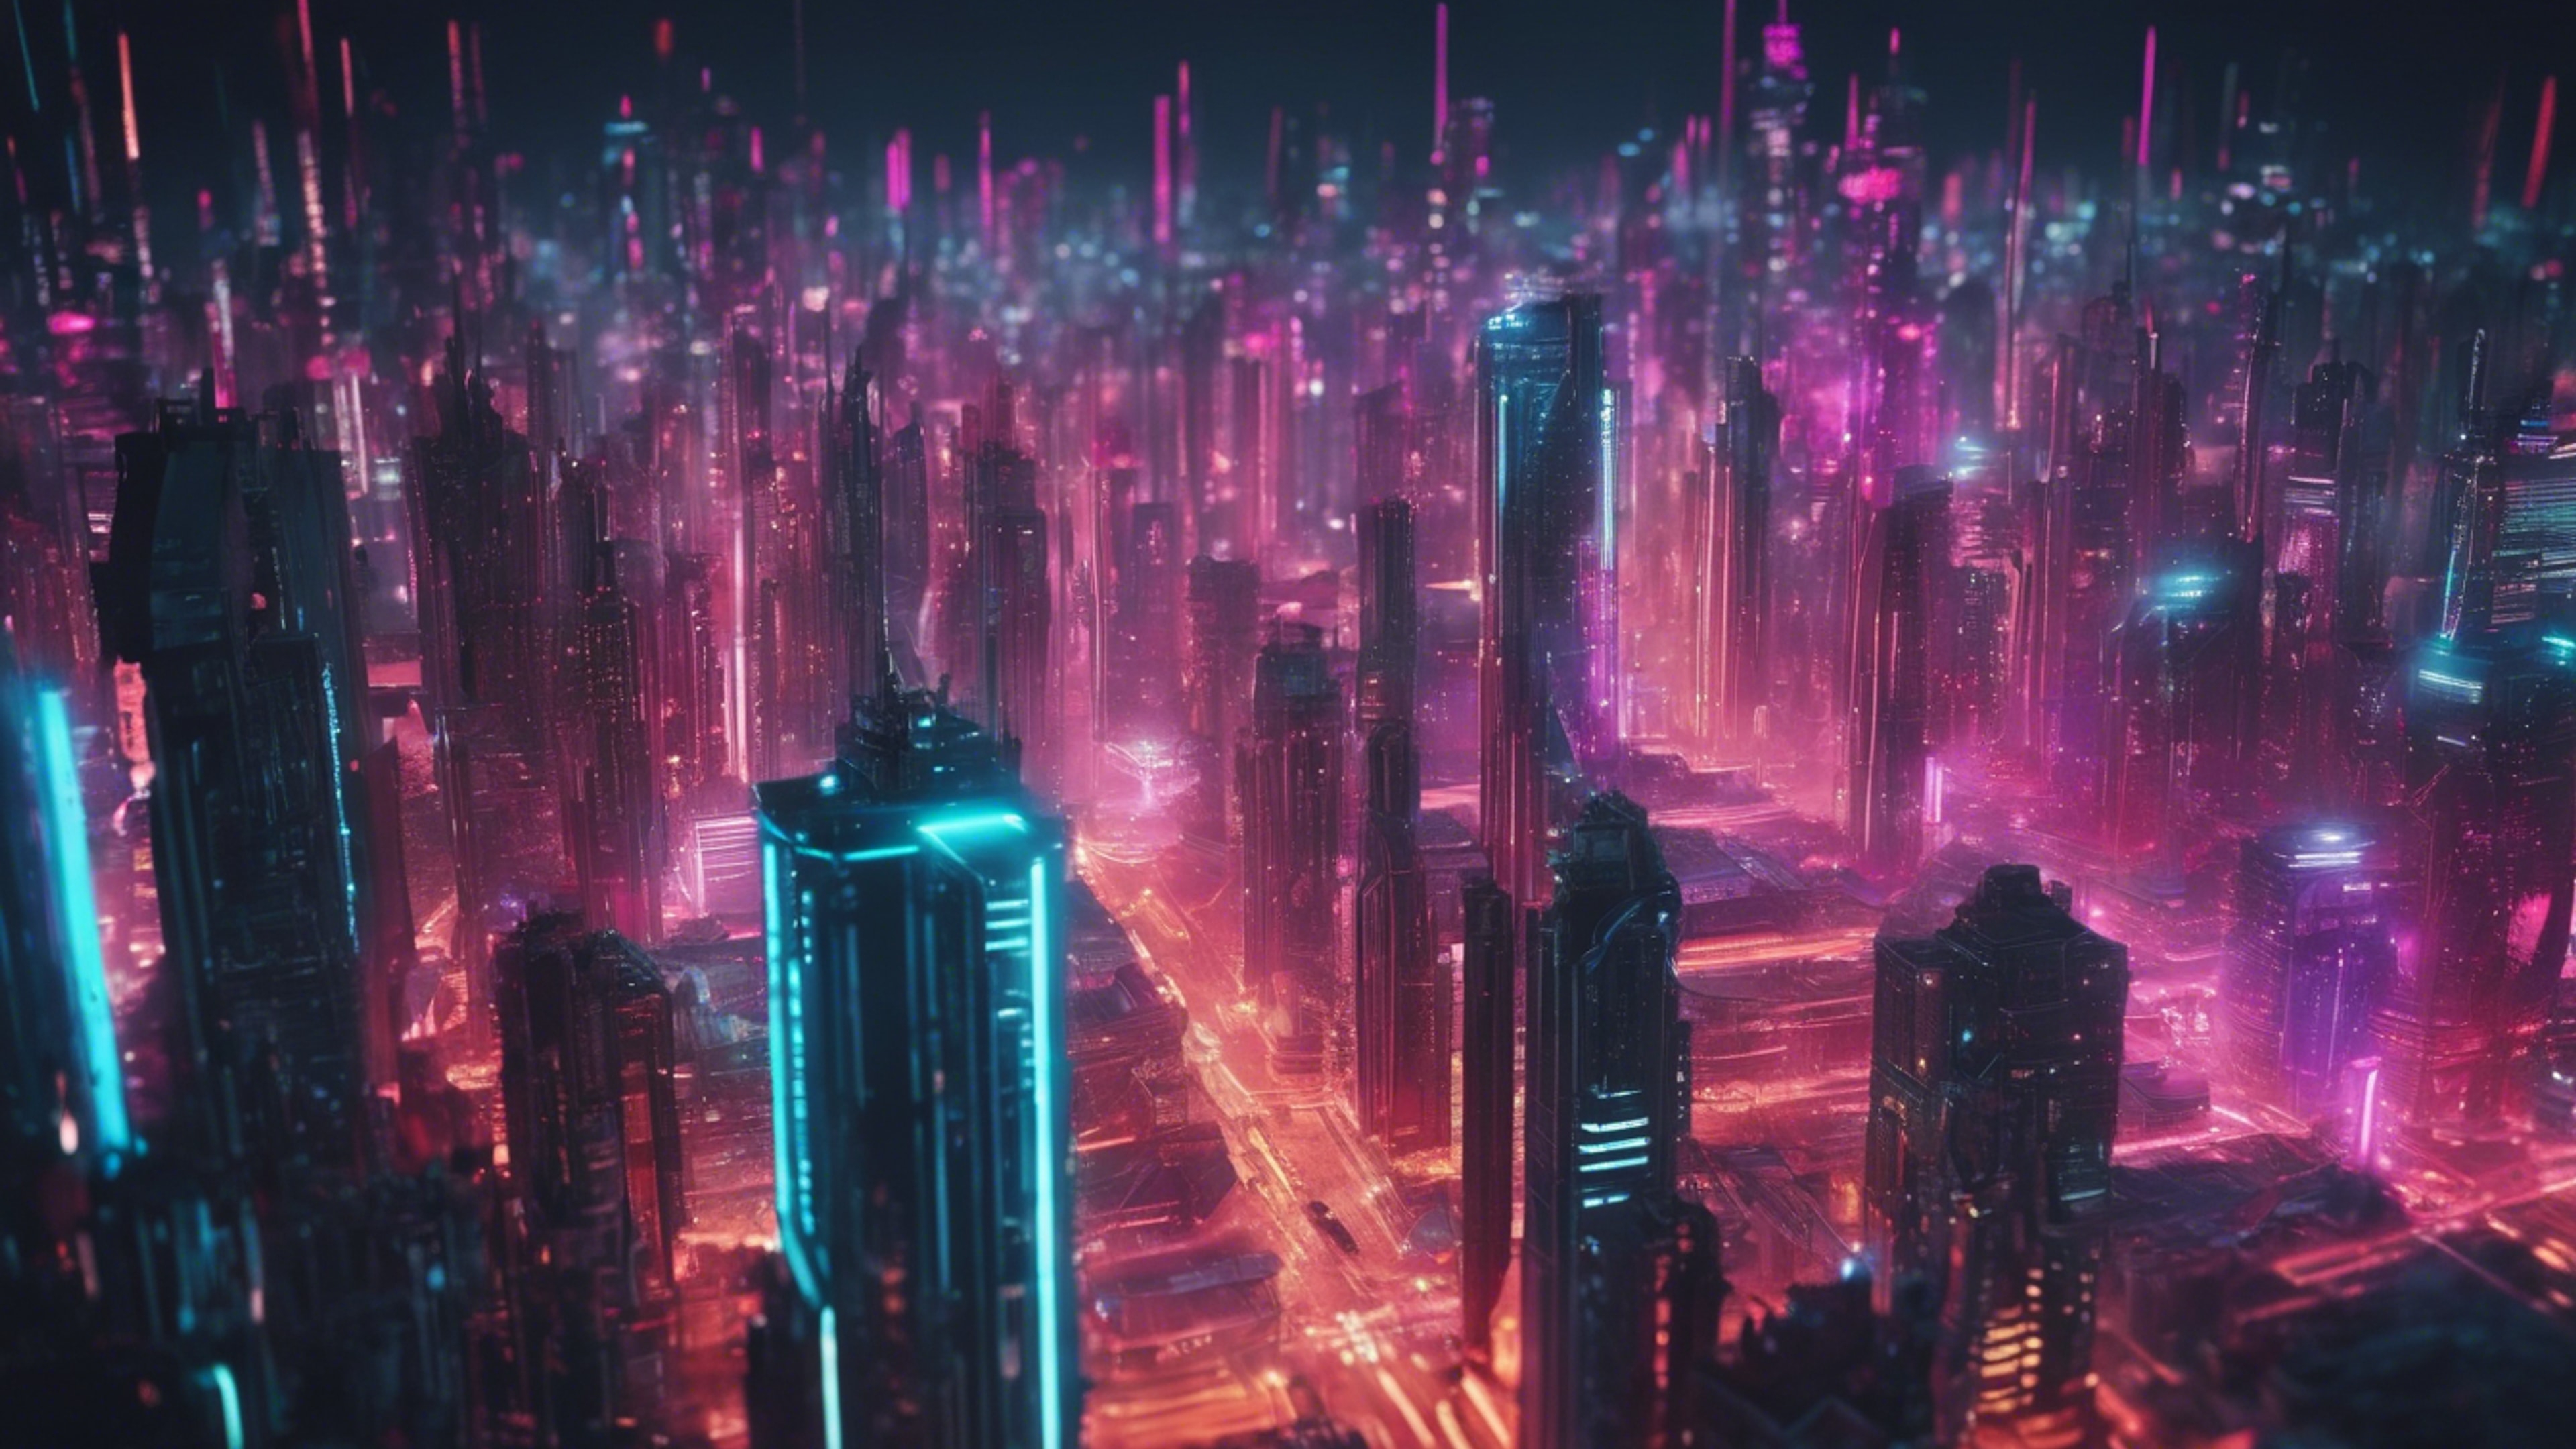 An abstract rendition of a cyberpunk city skyline lit up with neon lights. 벽지[be51173c54ff4f4dbec8]